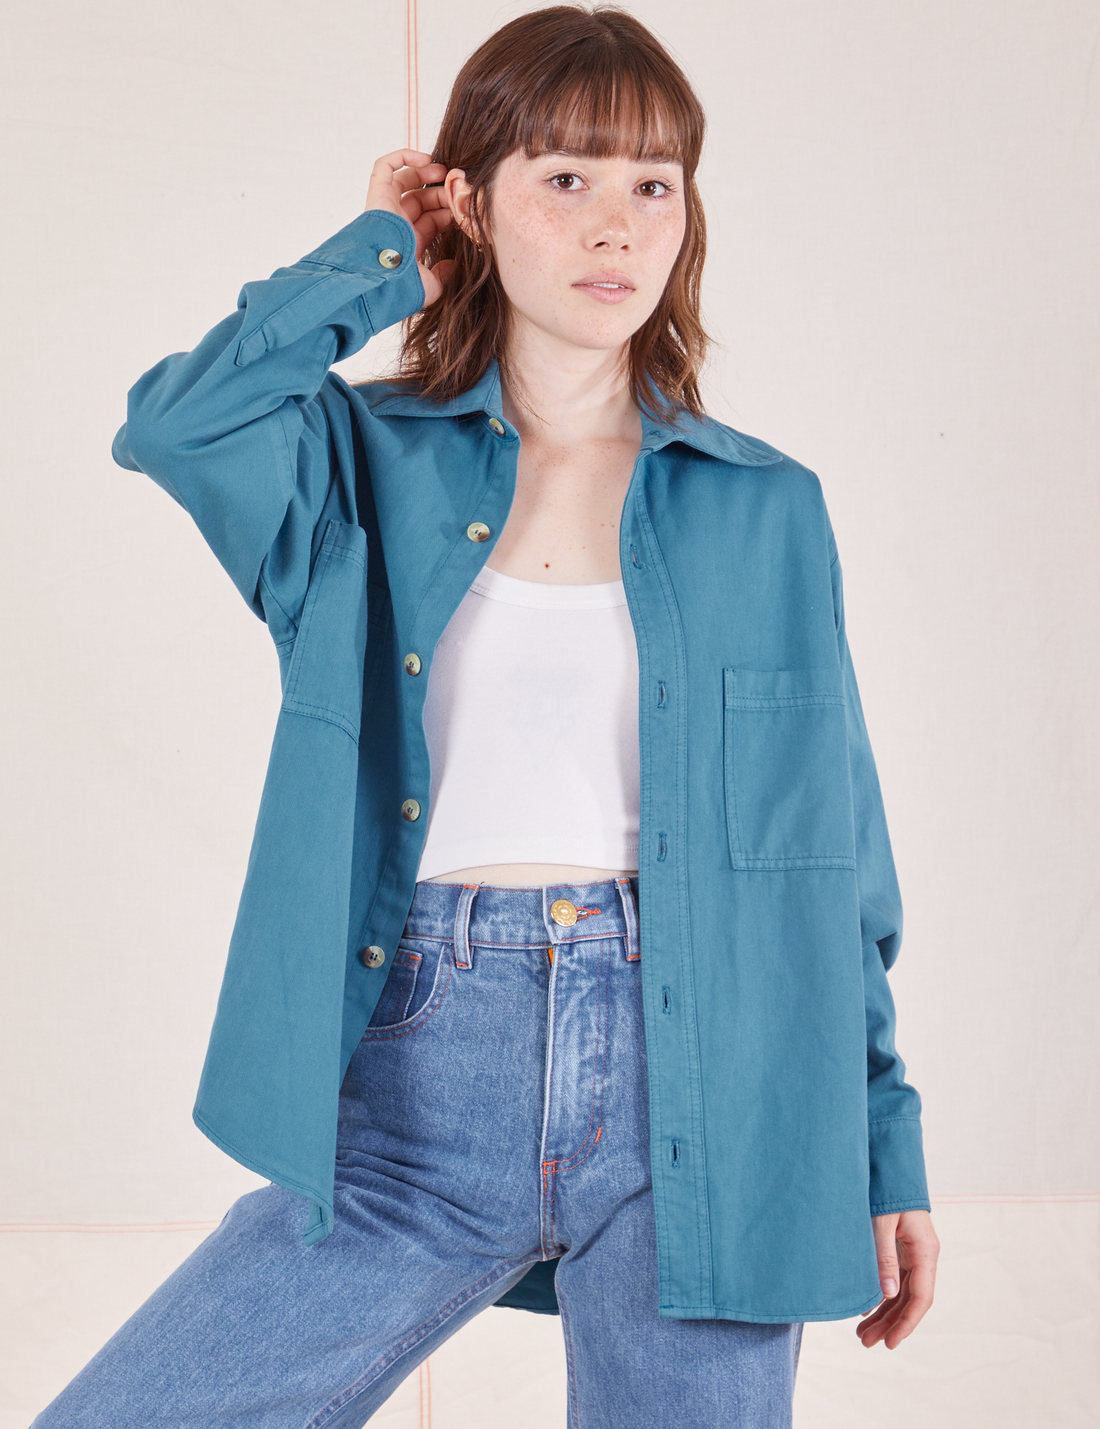 Hana is wearing size P Oversize Overshirt in Marine Blue with a vintage off-white Cropped Tank Top underneath